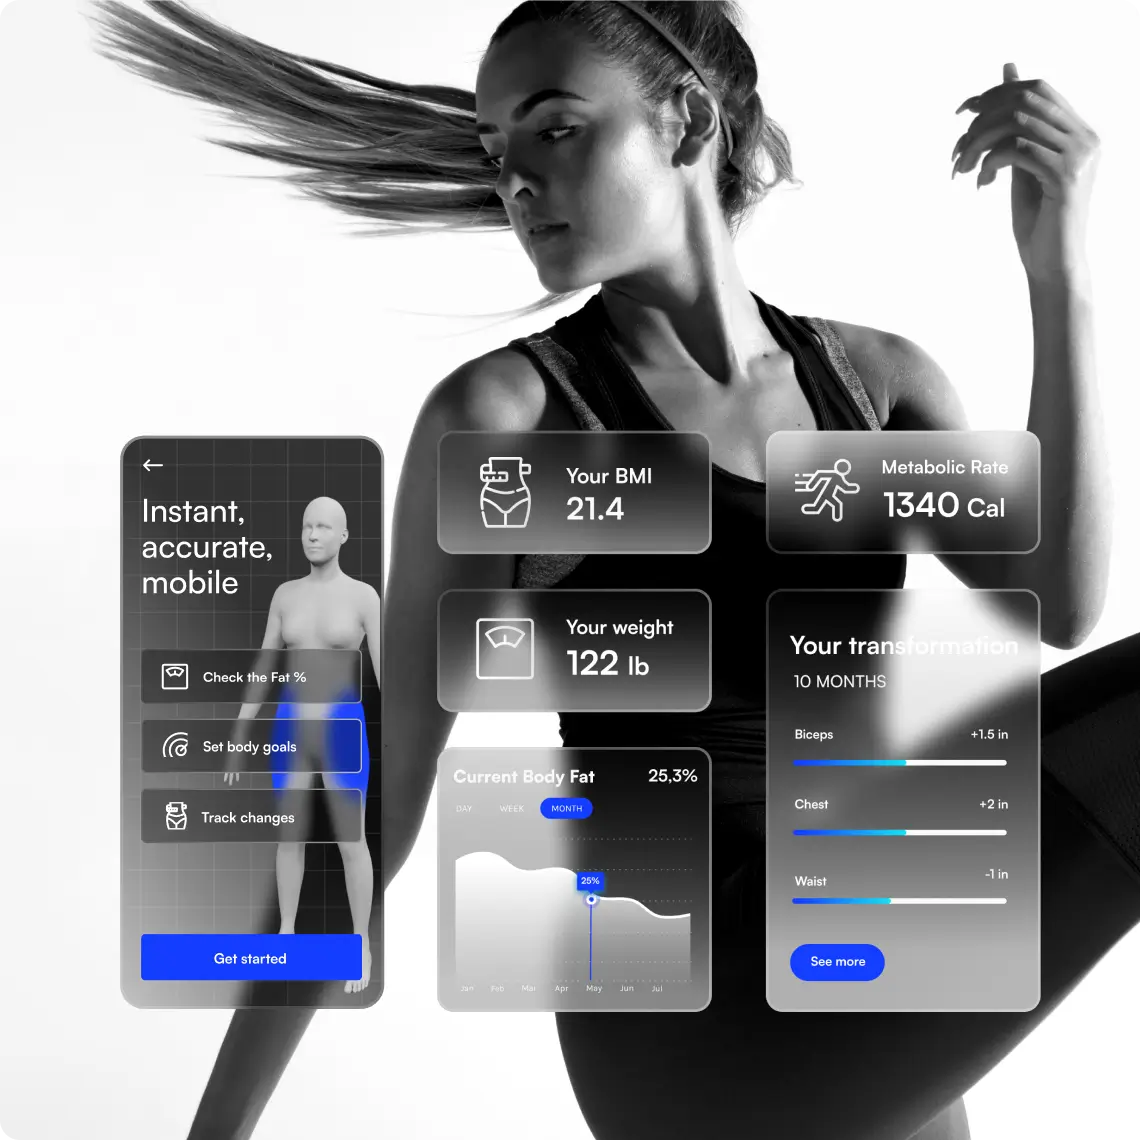 SEO-optimized fitness-focused technology interface showcasing health metrics alongside a dynamic image of a woman engaged in physical activity on the homepage.